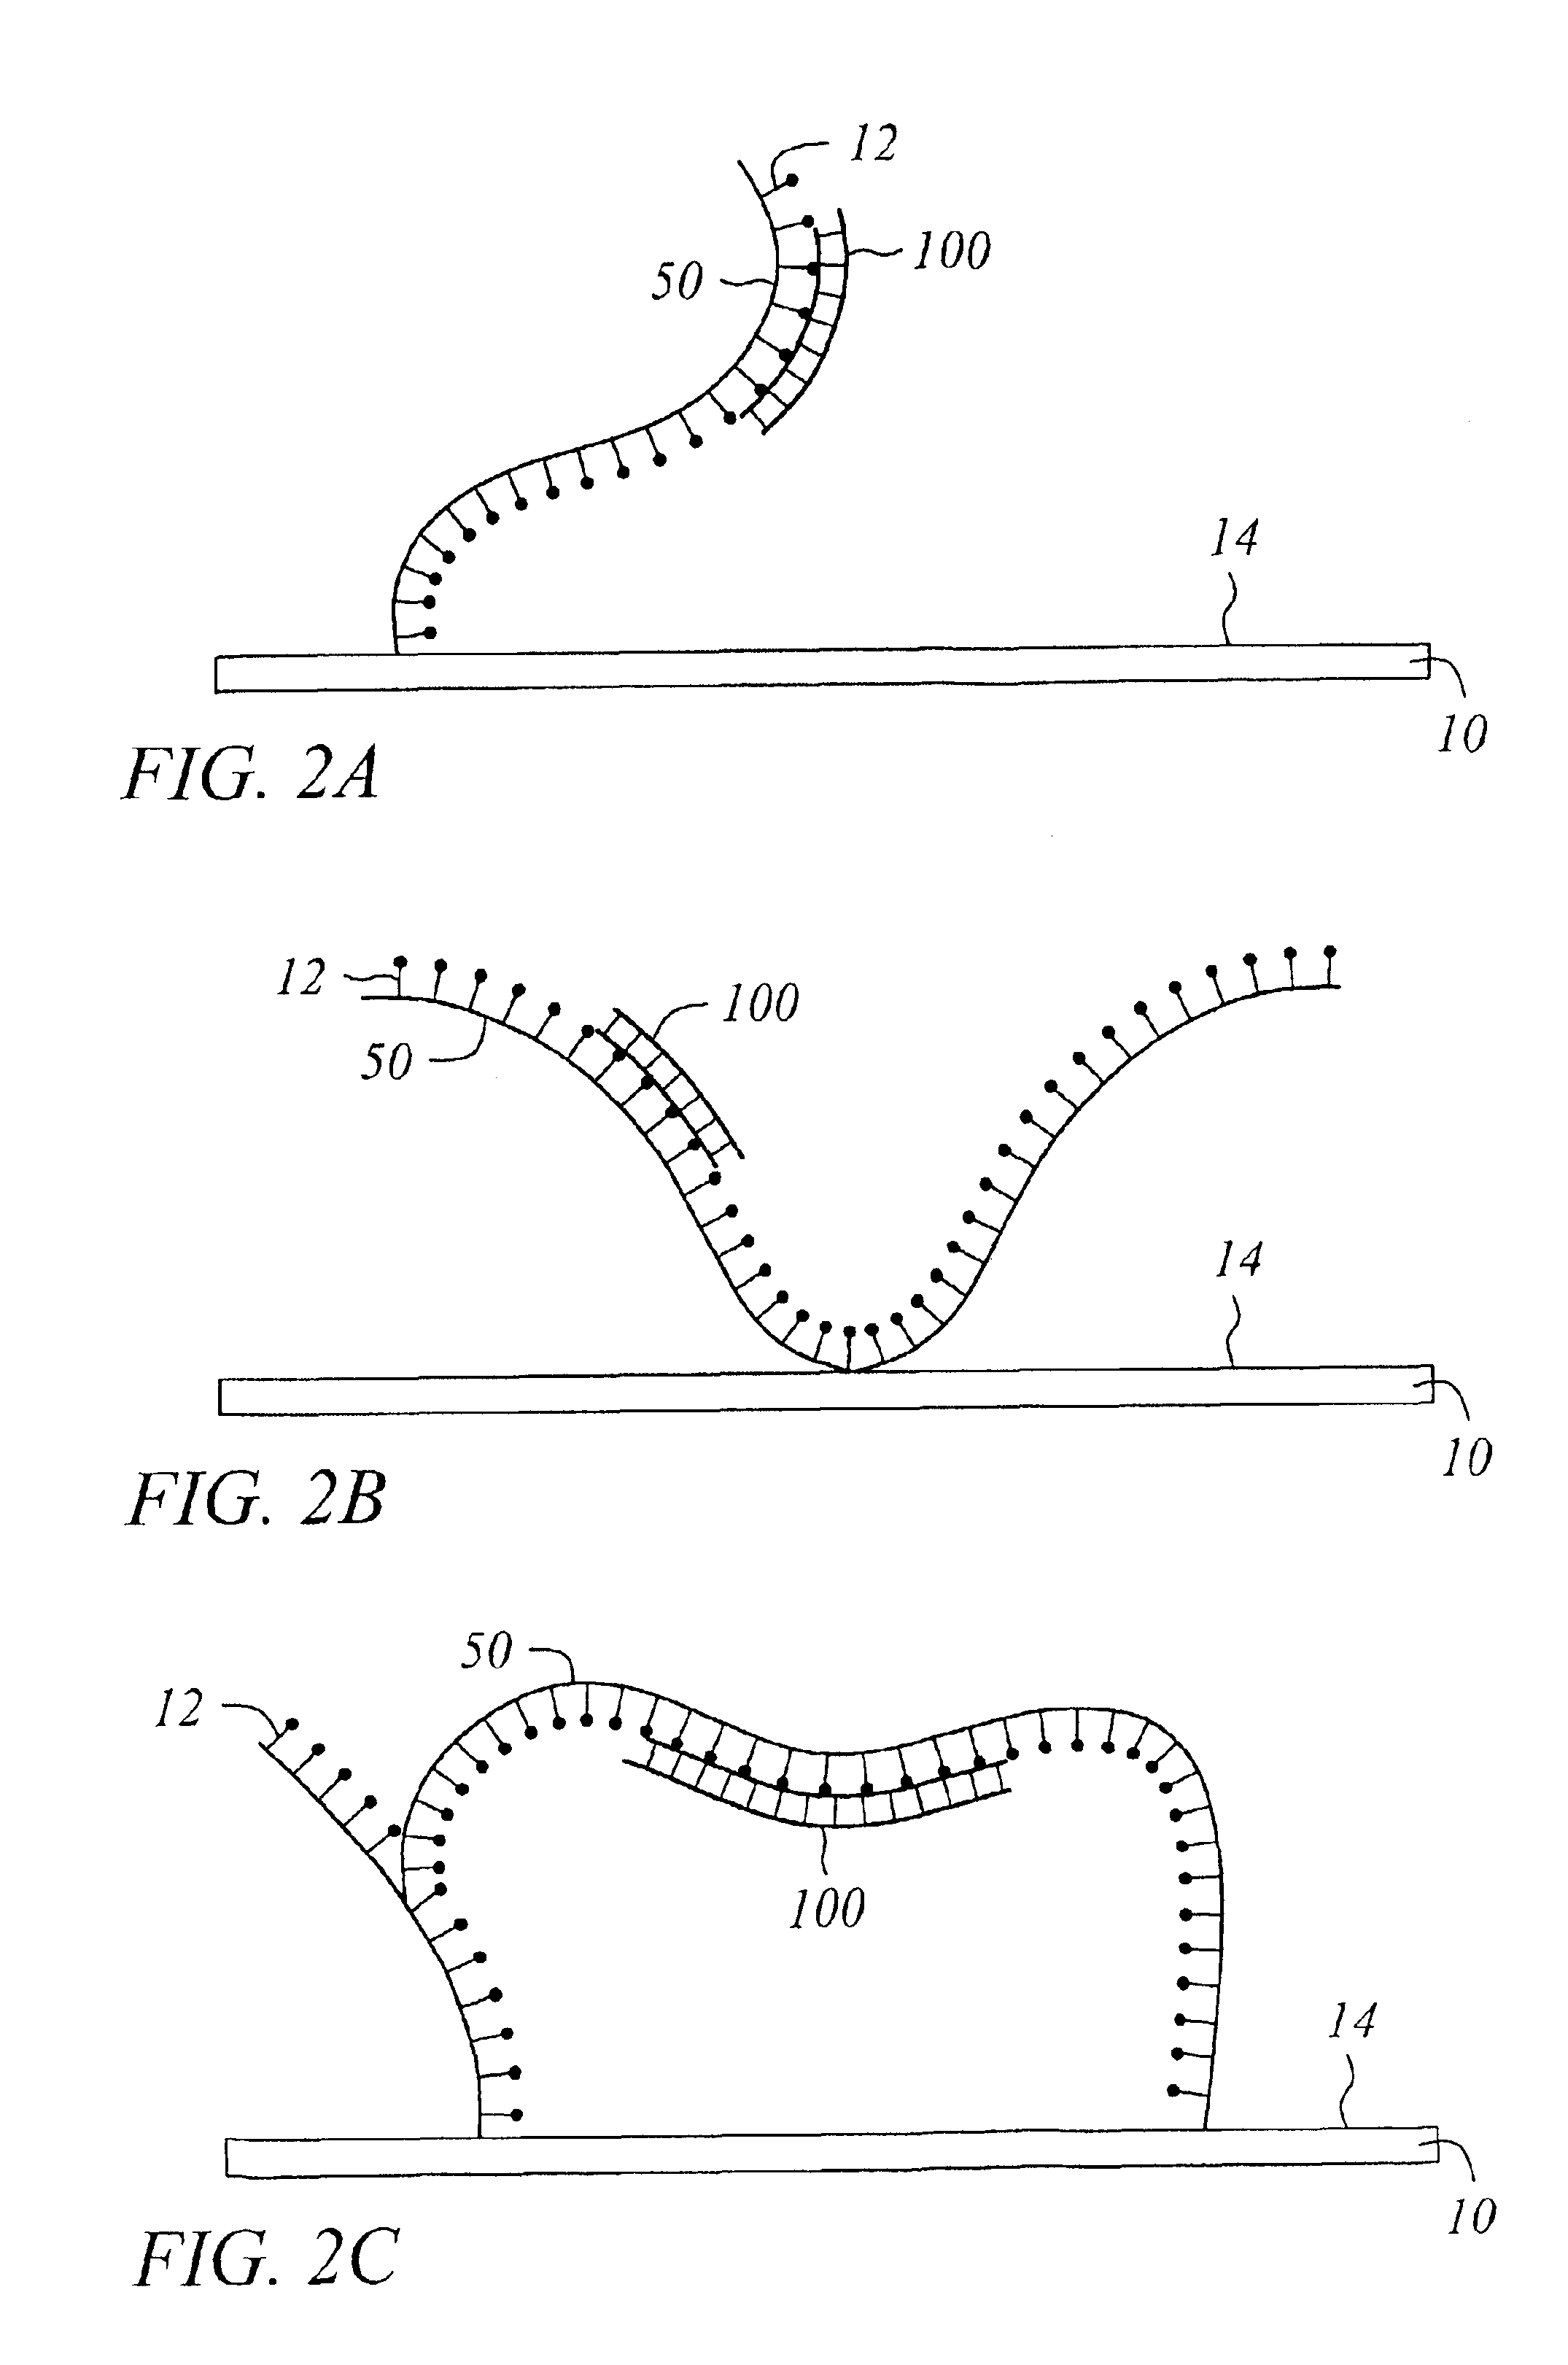 Surface with tethered polymeric species for binding biomolecules